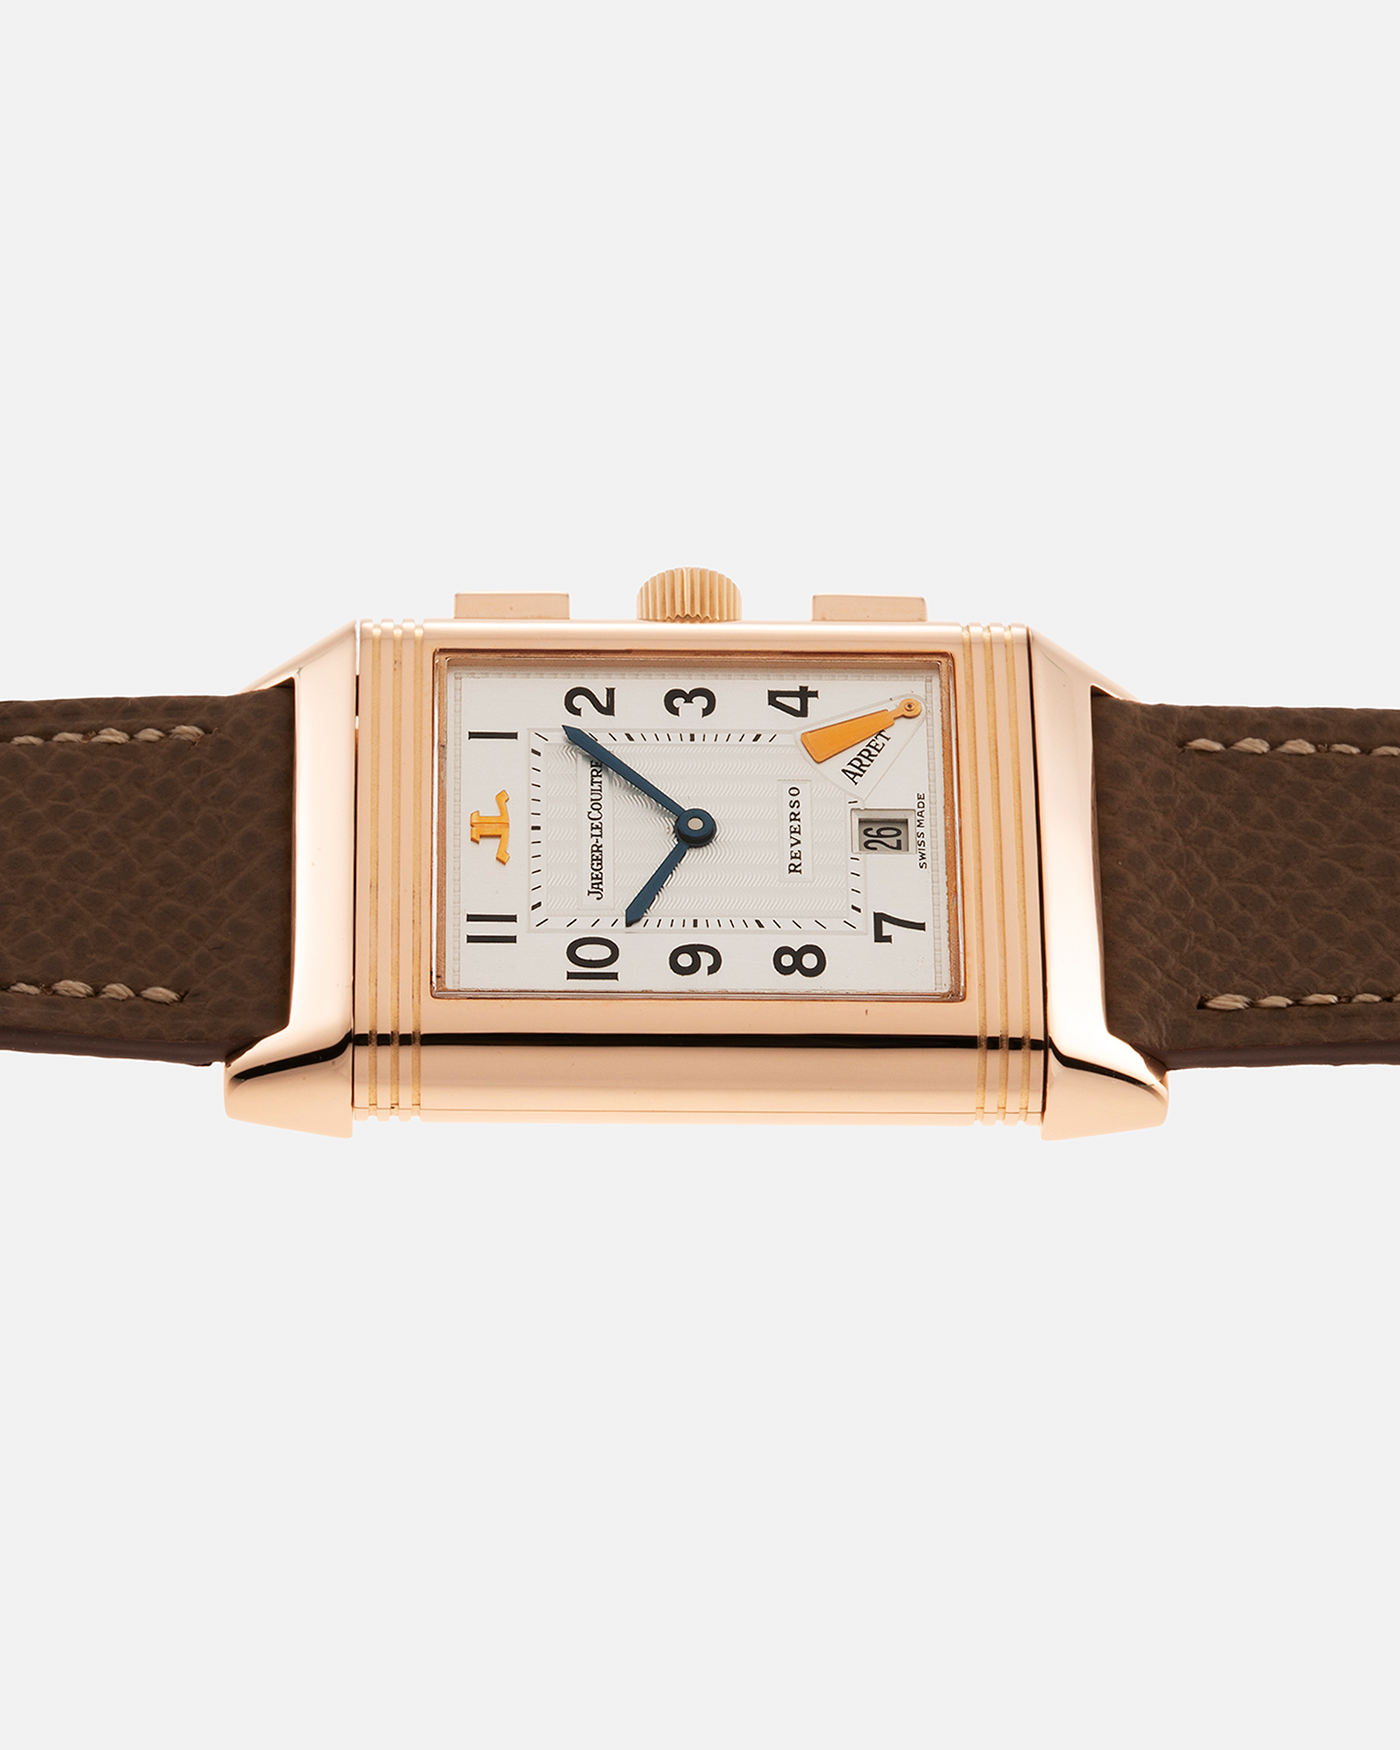 Brand: Jaeger LeCoultre Year: 1996 Model: Reverso Chronographe Retrograde, BALE Prototype of 20 pieces Reference Number: 270.2.69 Serial Number: BALE 96/16 Material: 18-carat Rose Gold Movement: JLC Cal. 829, Manual-Wind Case Diameter: 42mm x 26mm x 9.5mm Lug Width: 19mm Strap: Nostime Taupe Leather Strap with Signed 18-carat Rose Gold Deployant Clasp